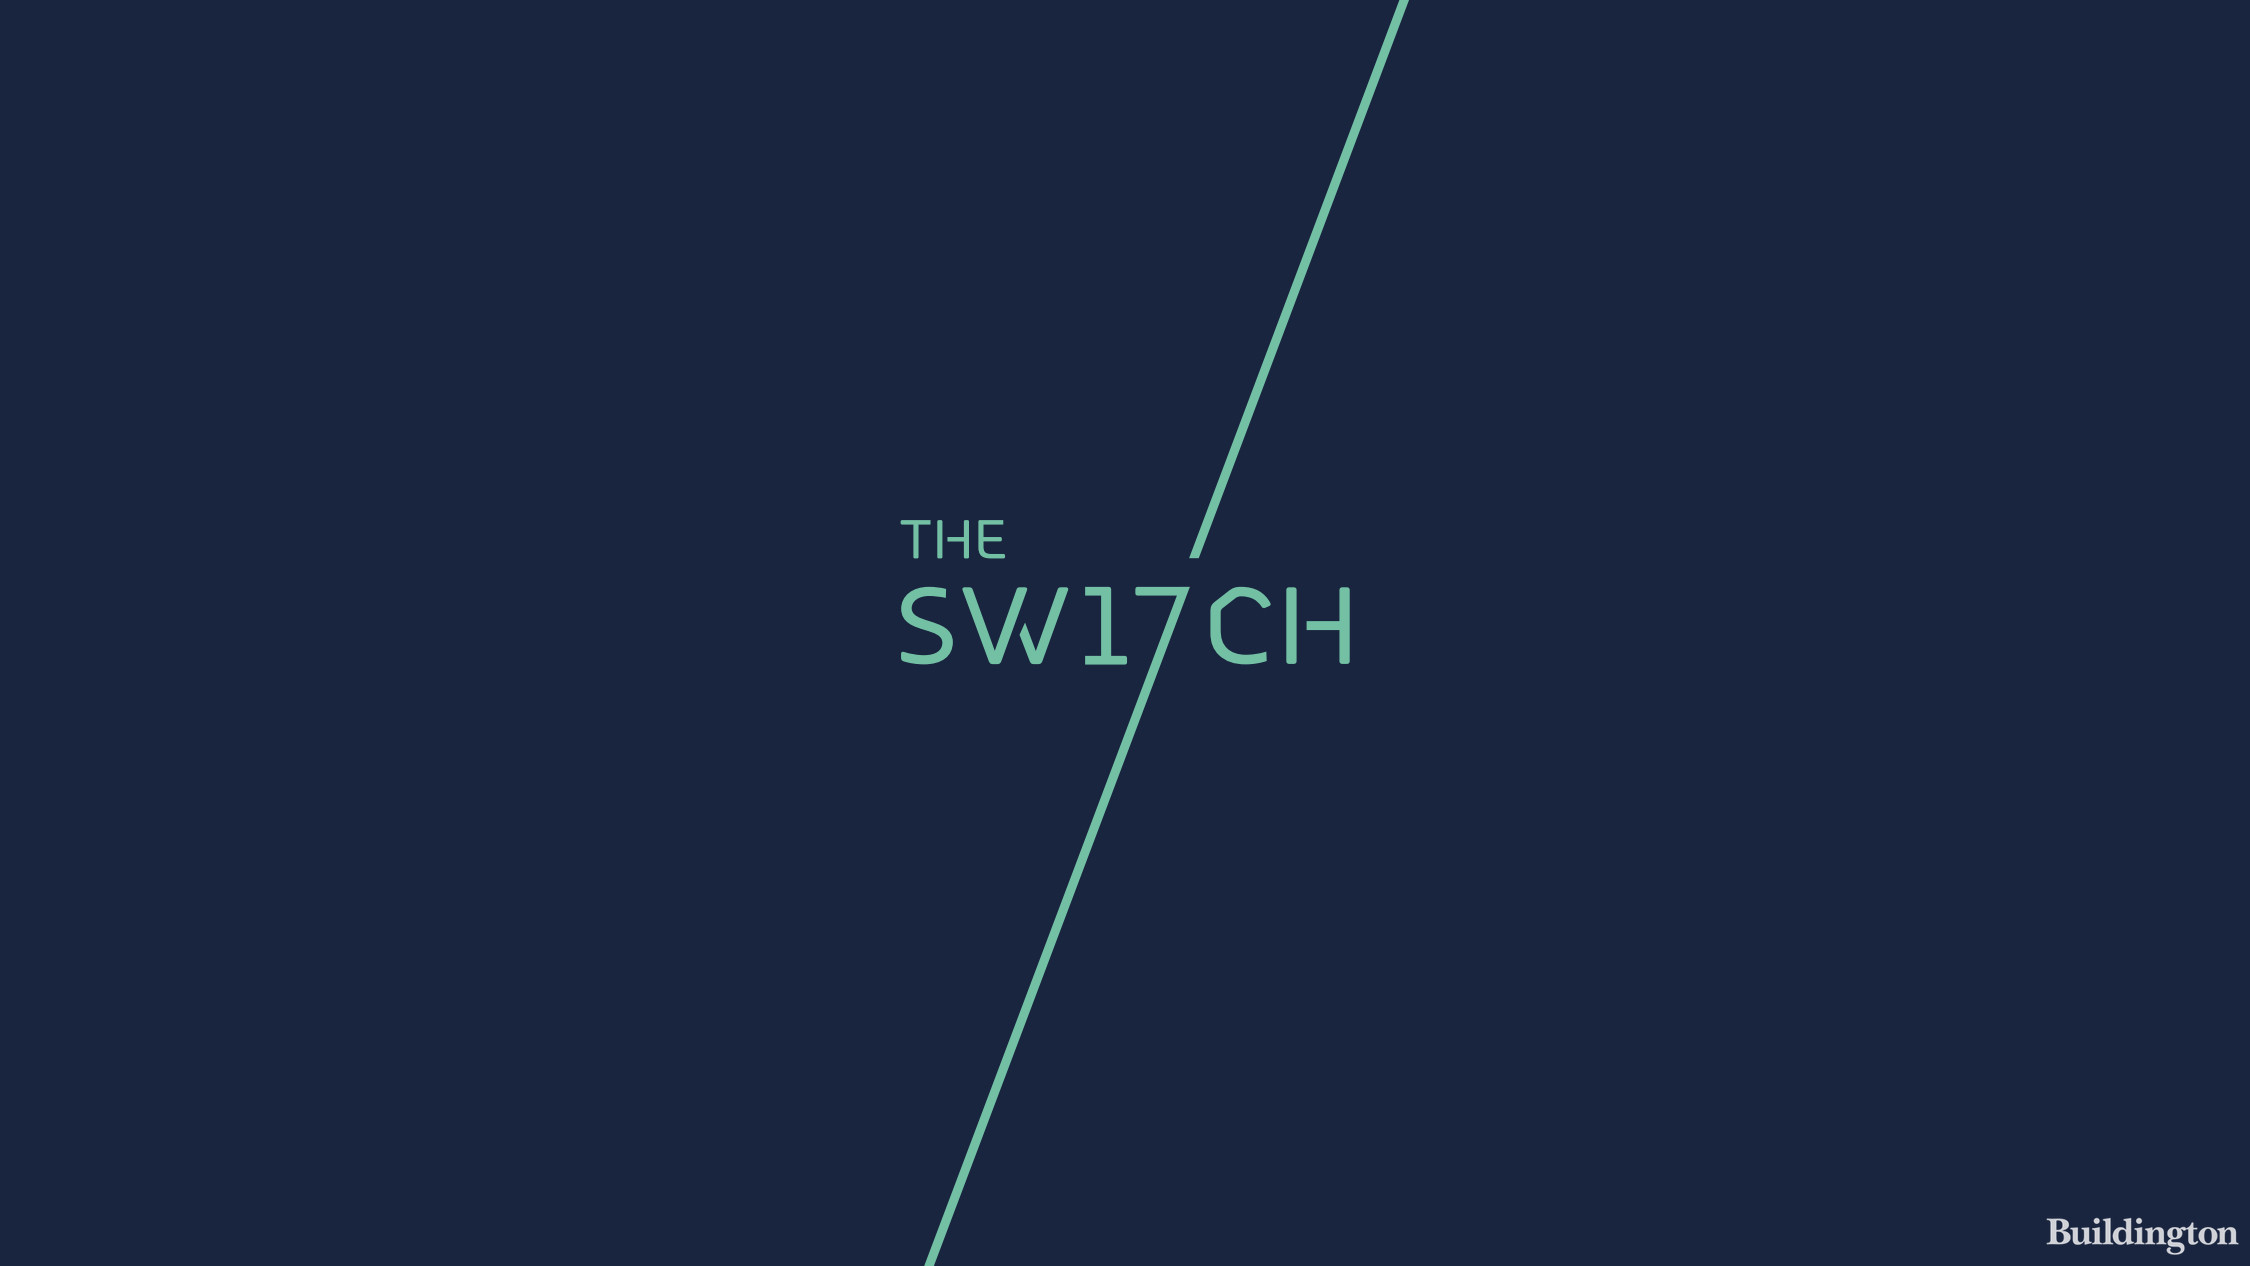 The Switch development logo cover